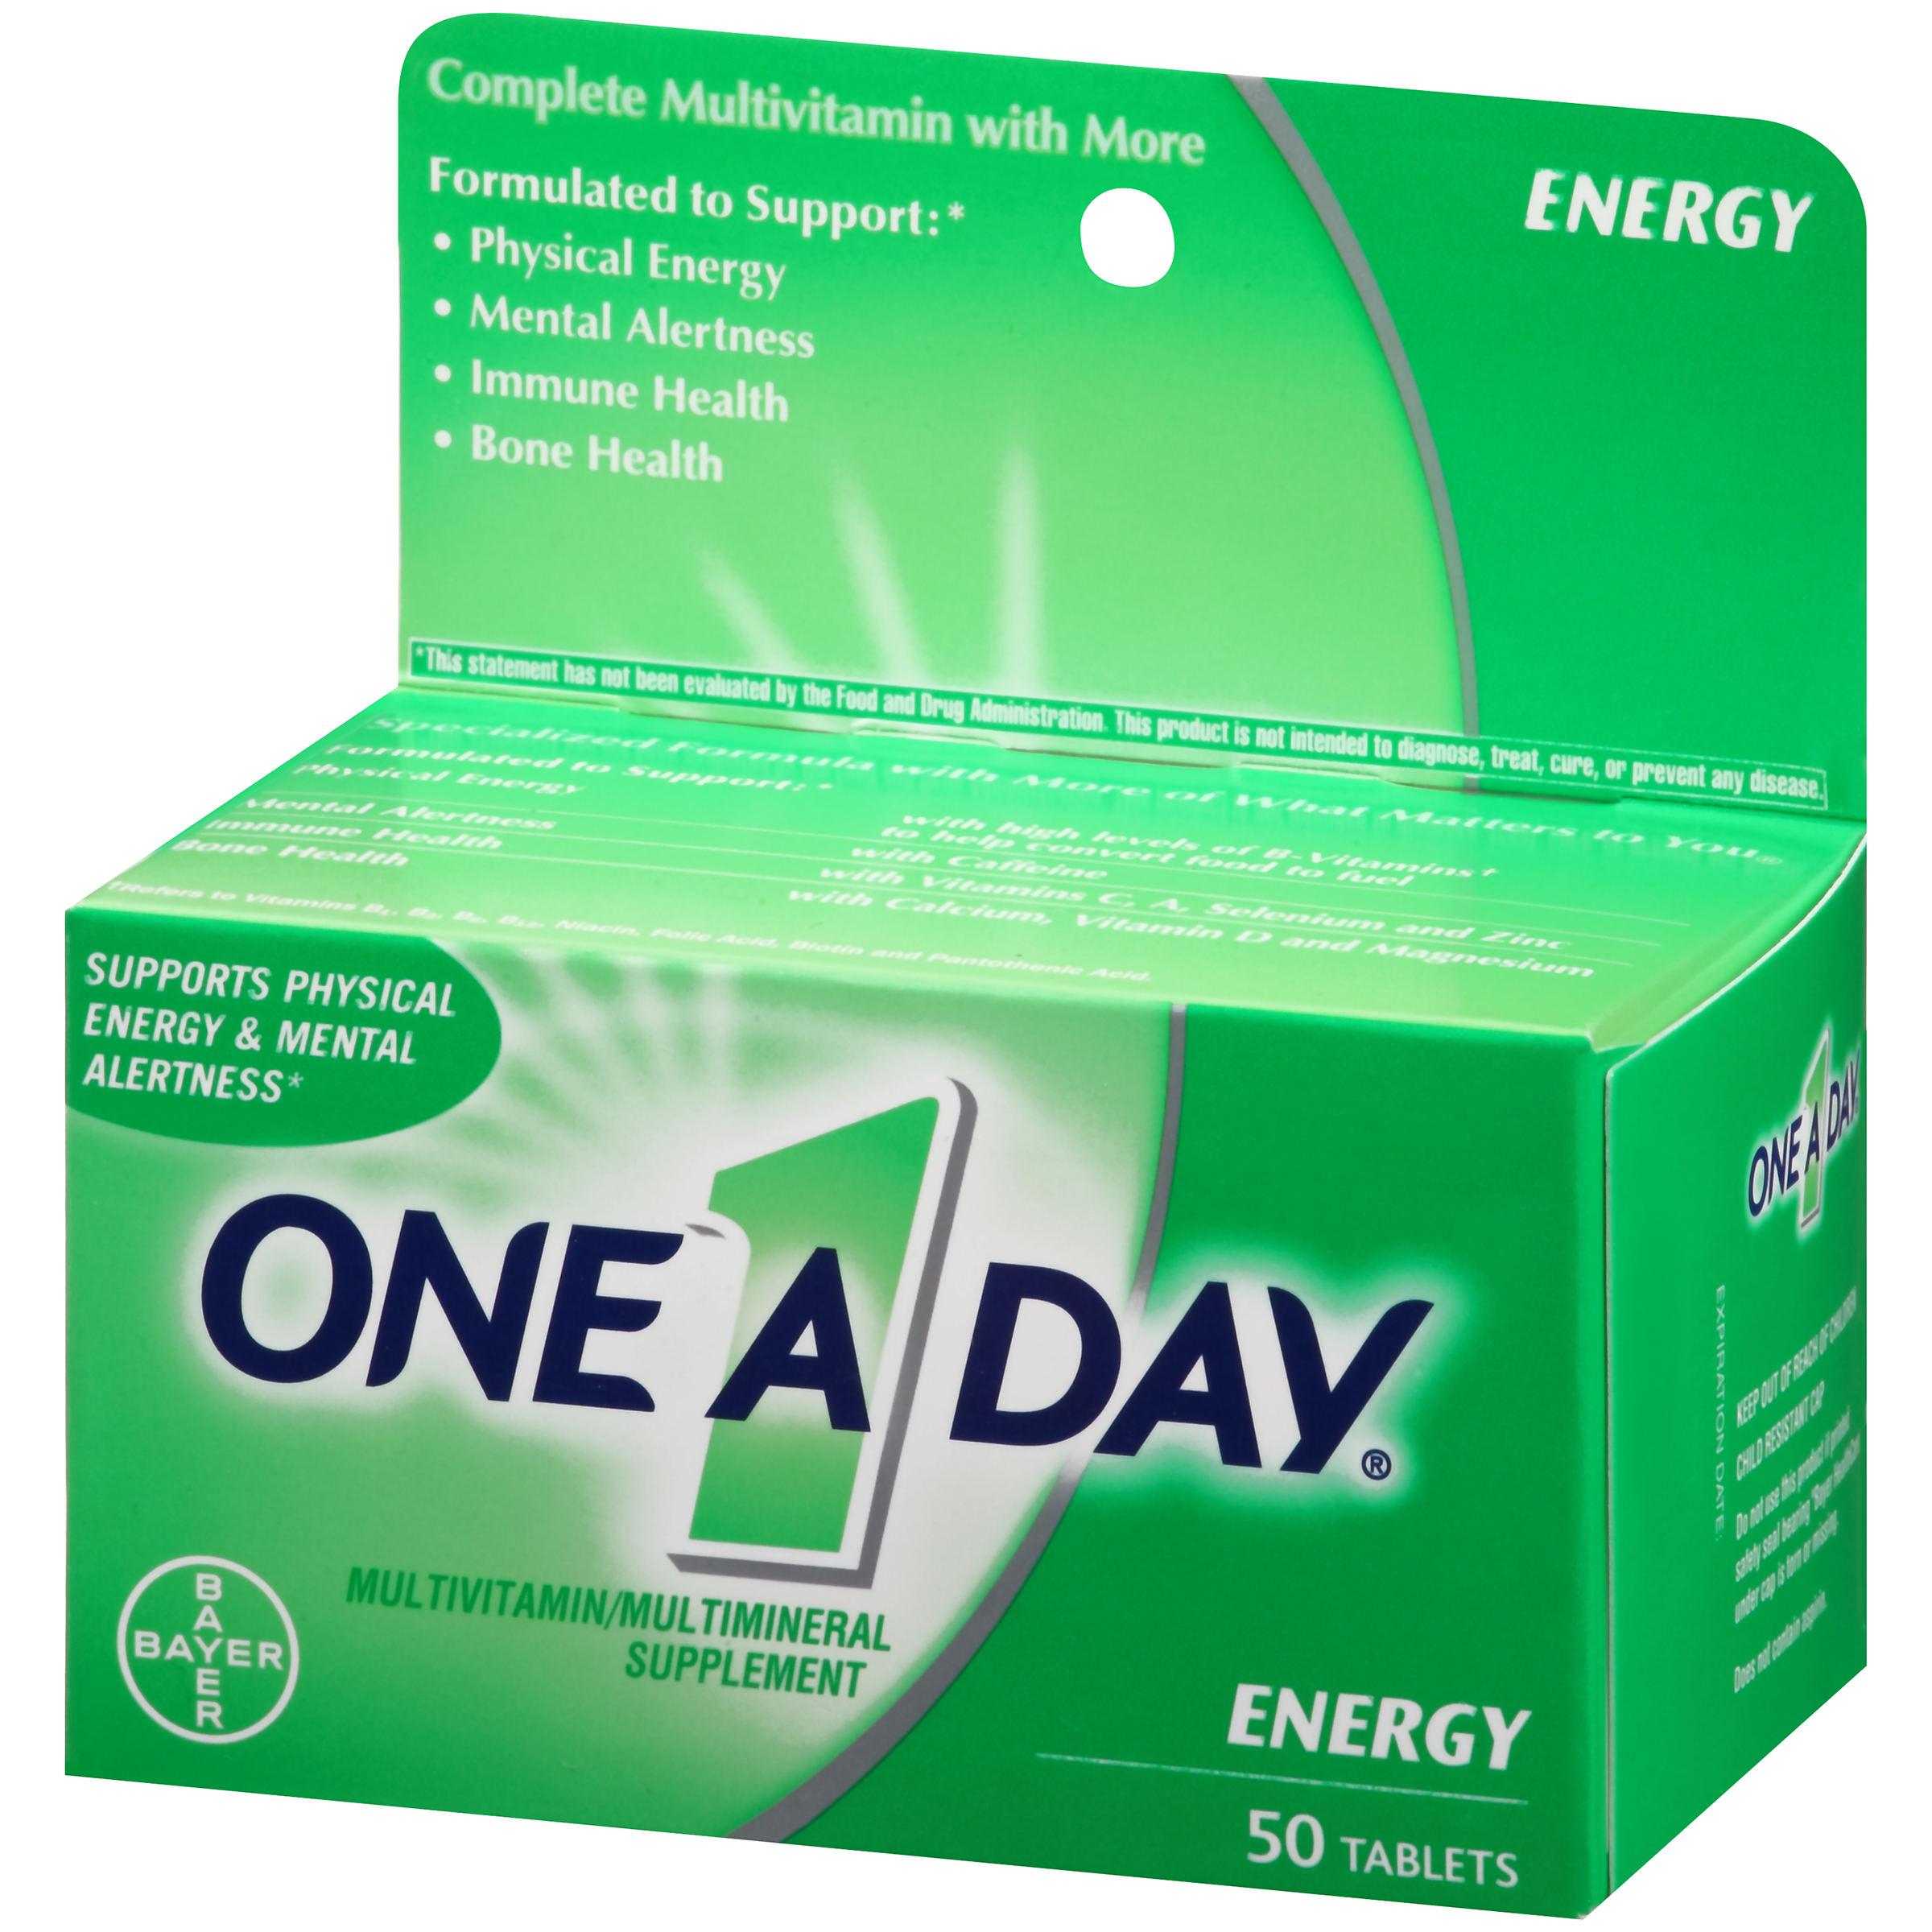 One A Day Energy, Multivitamin Supplement including Caffeine, Vitamins A, C, E, B1, B2, B6, B12, Calcium and Vitamin D, 50 ct. - image 4 of 5